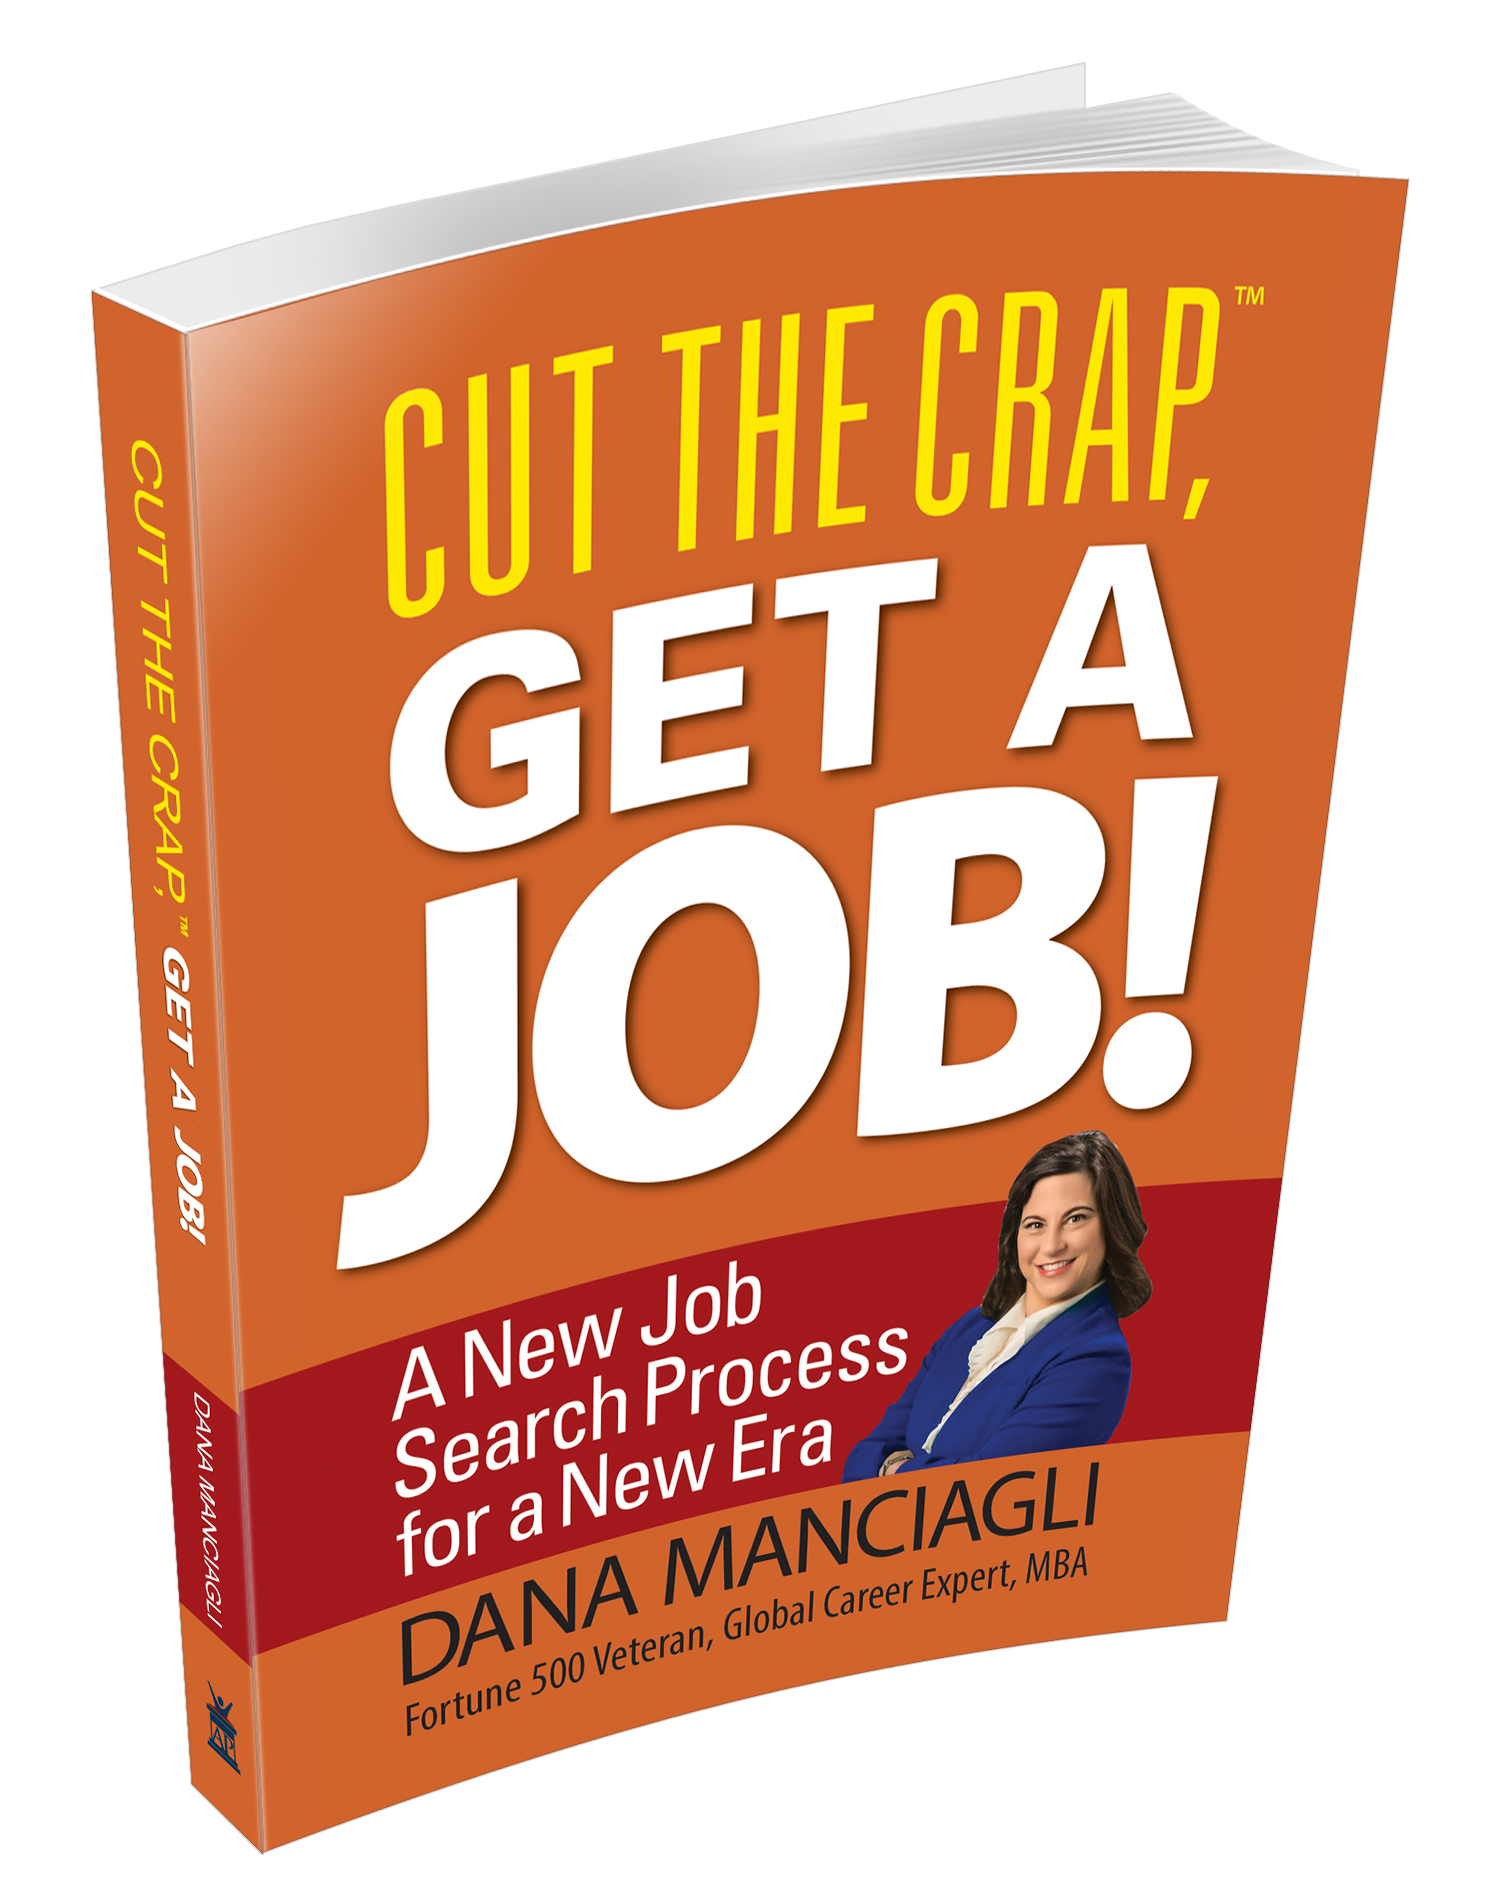 It’s Here! Cut the Crap, Get a Job! A Game-Changing New Book From a Veteran Hiring Manager